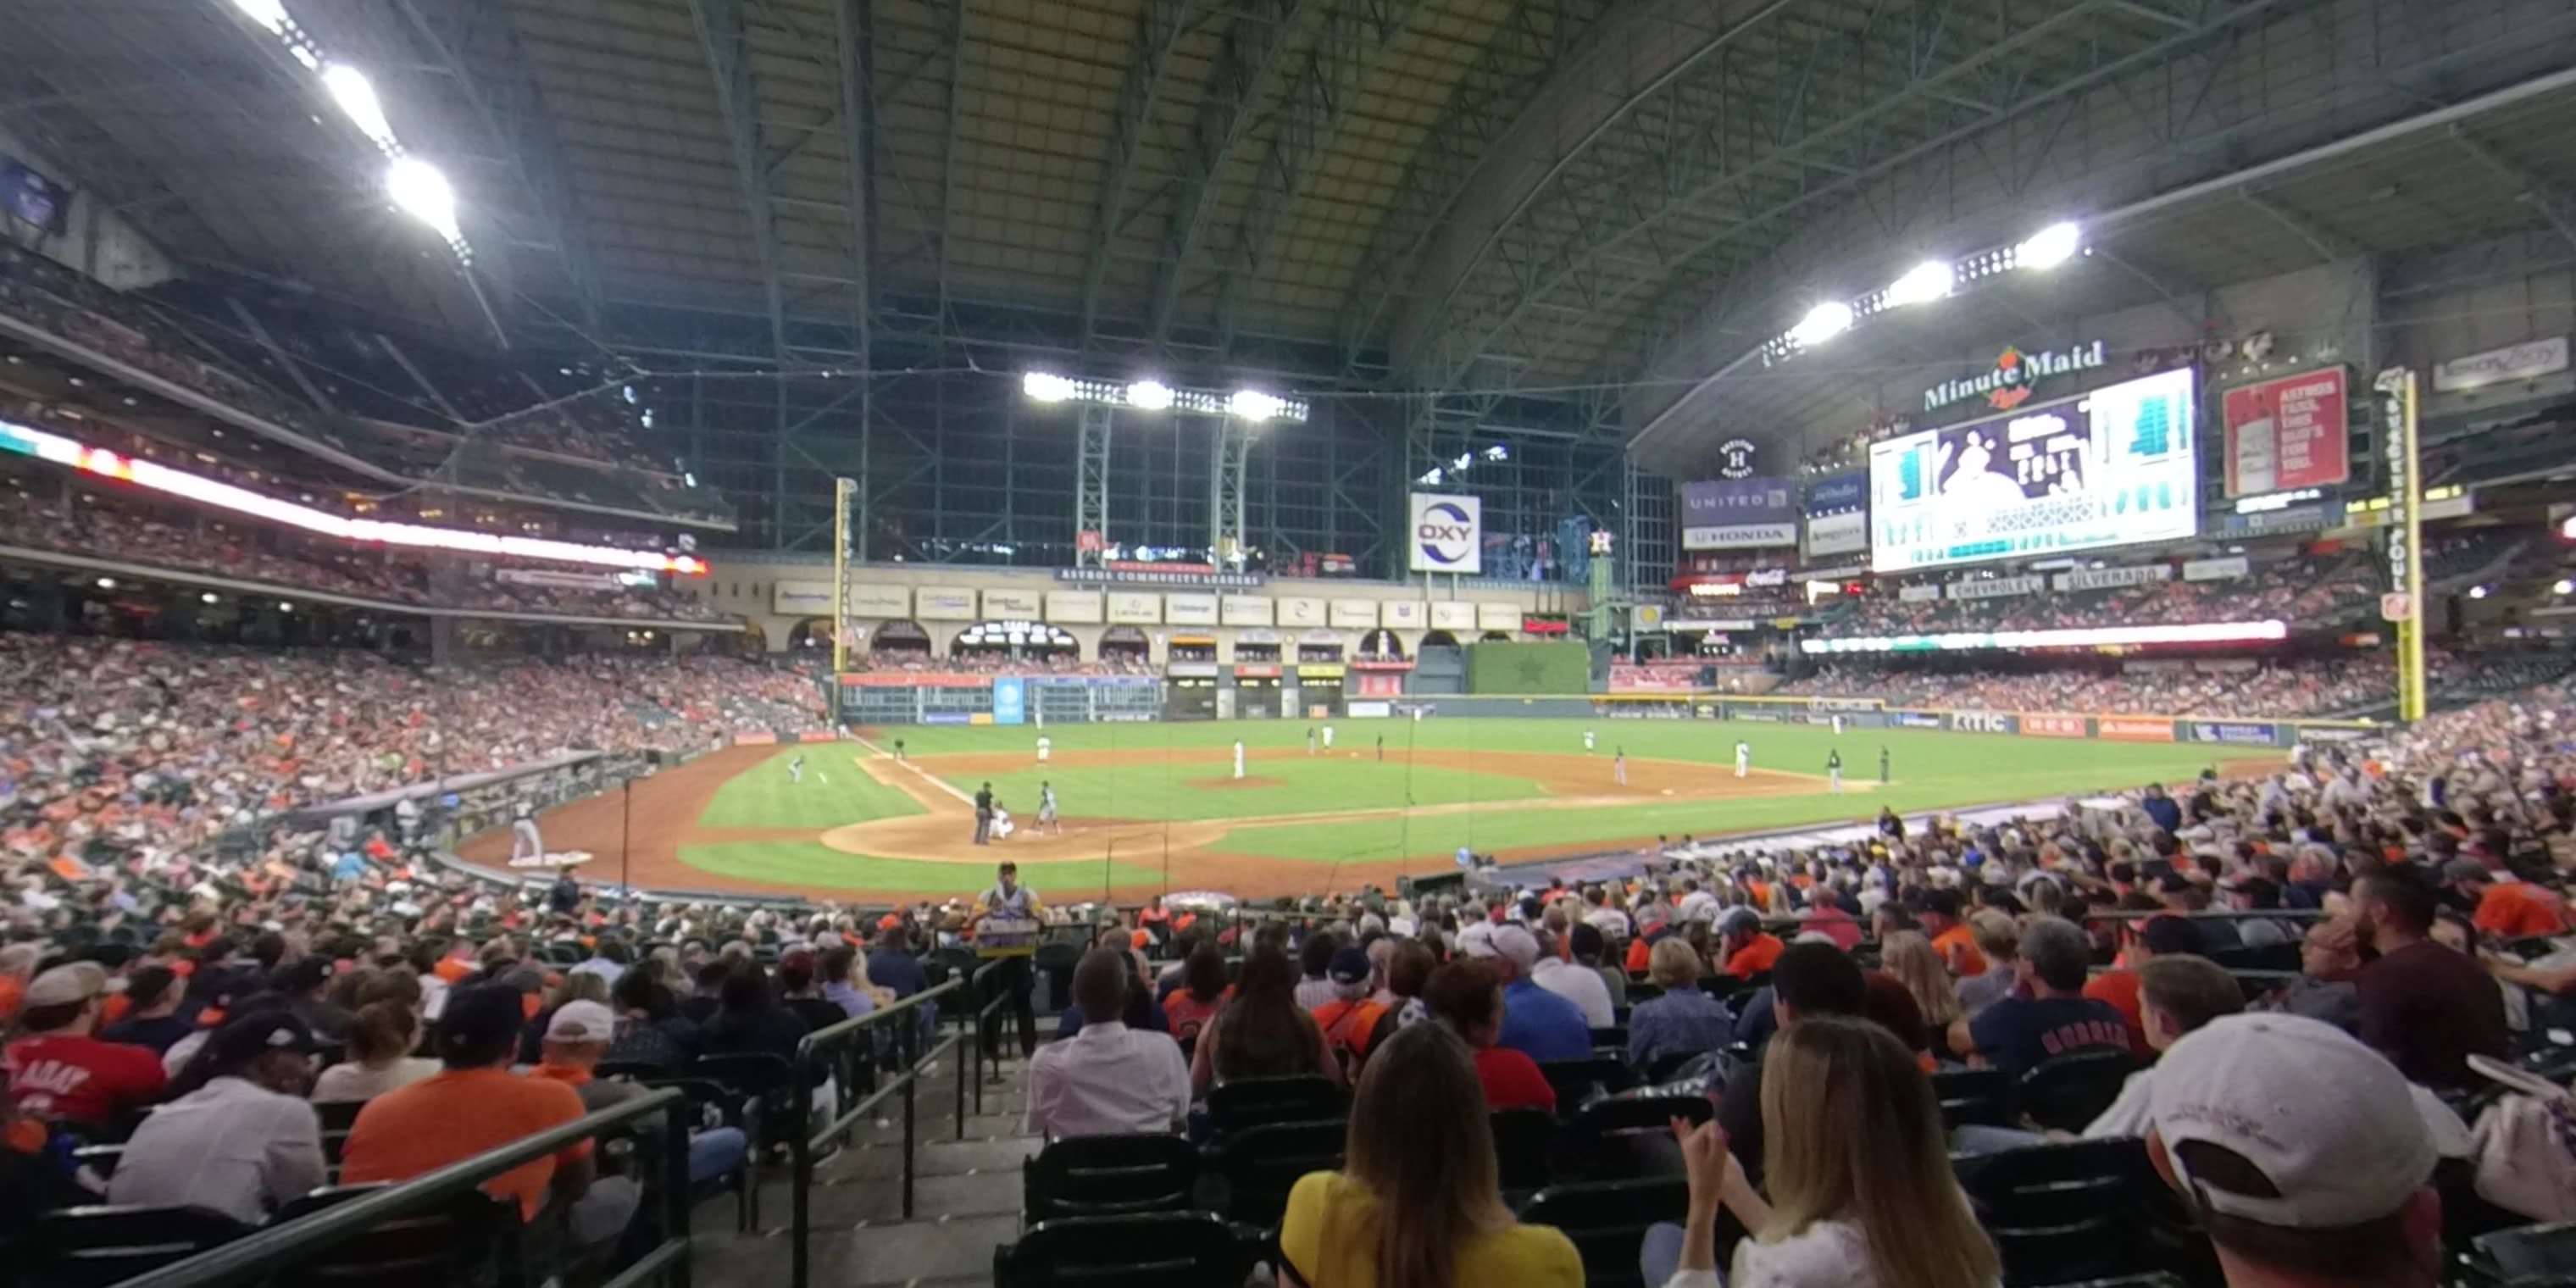 section 122 panoramic seat view  for baseball - minute maid park